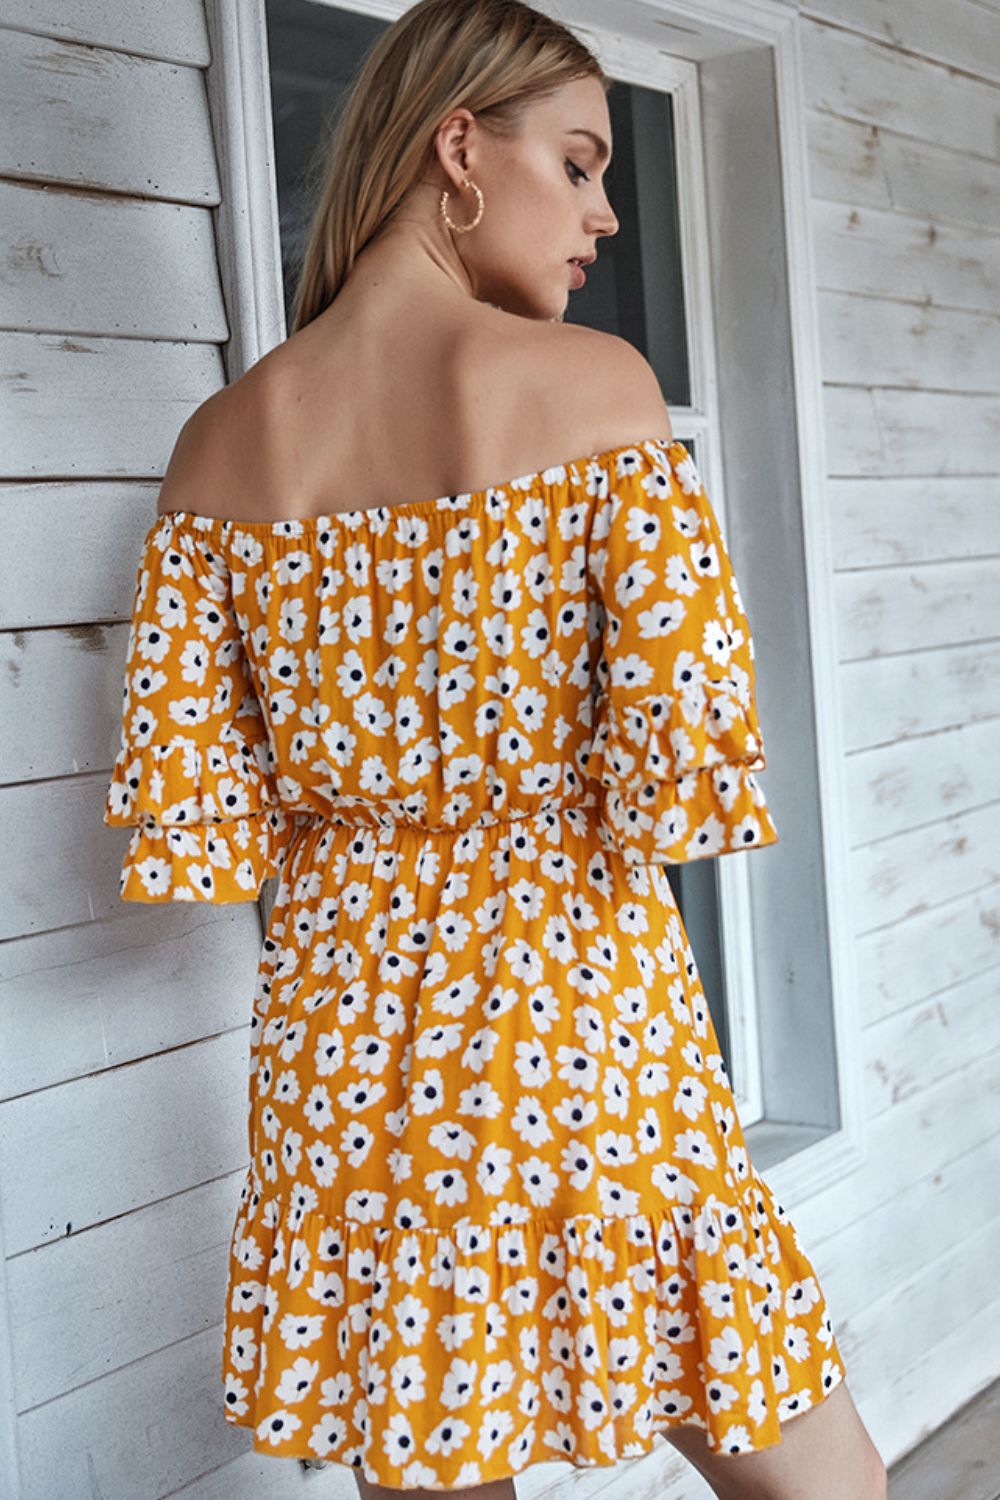 Chic Off The Shoulder Daisy Dress: Perfect for Summer Beach Weddings and Parties!